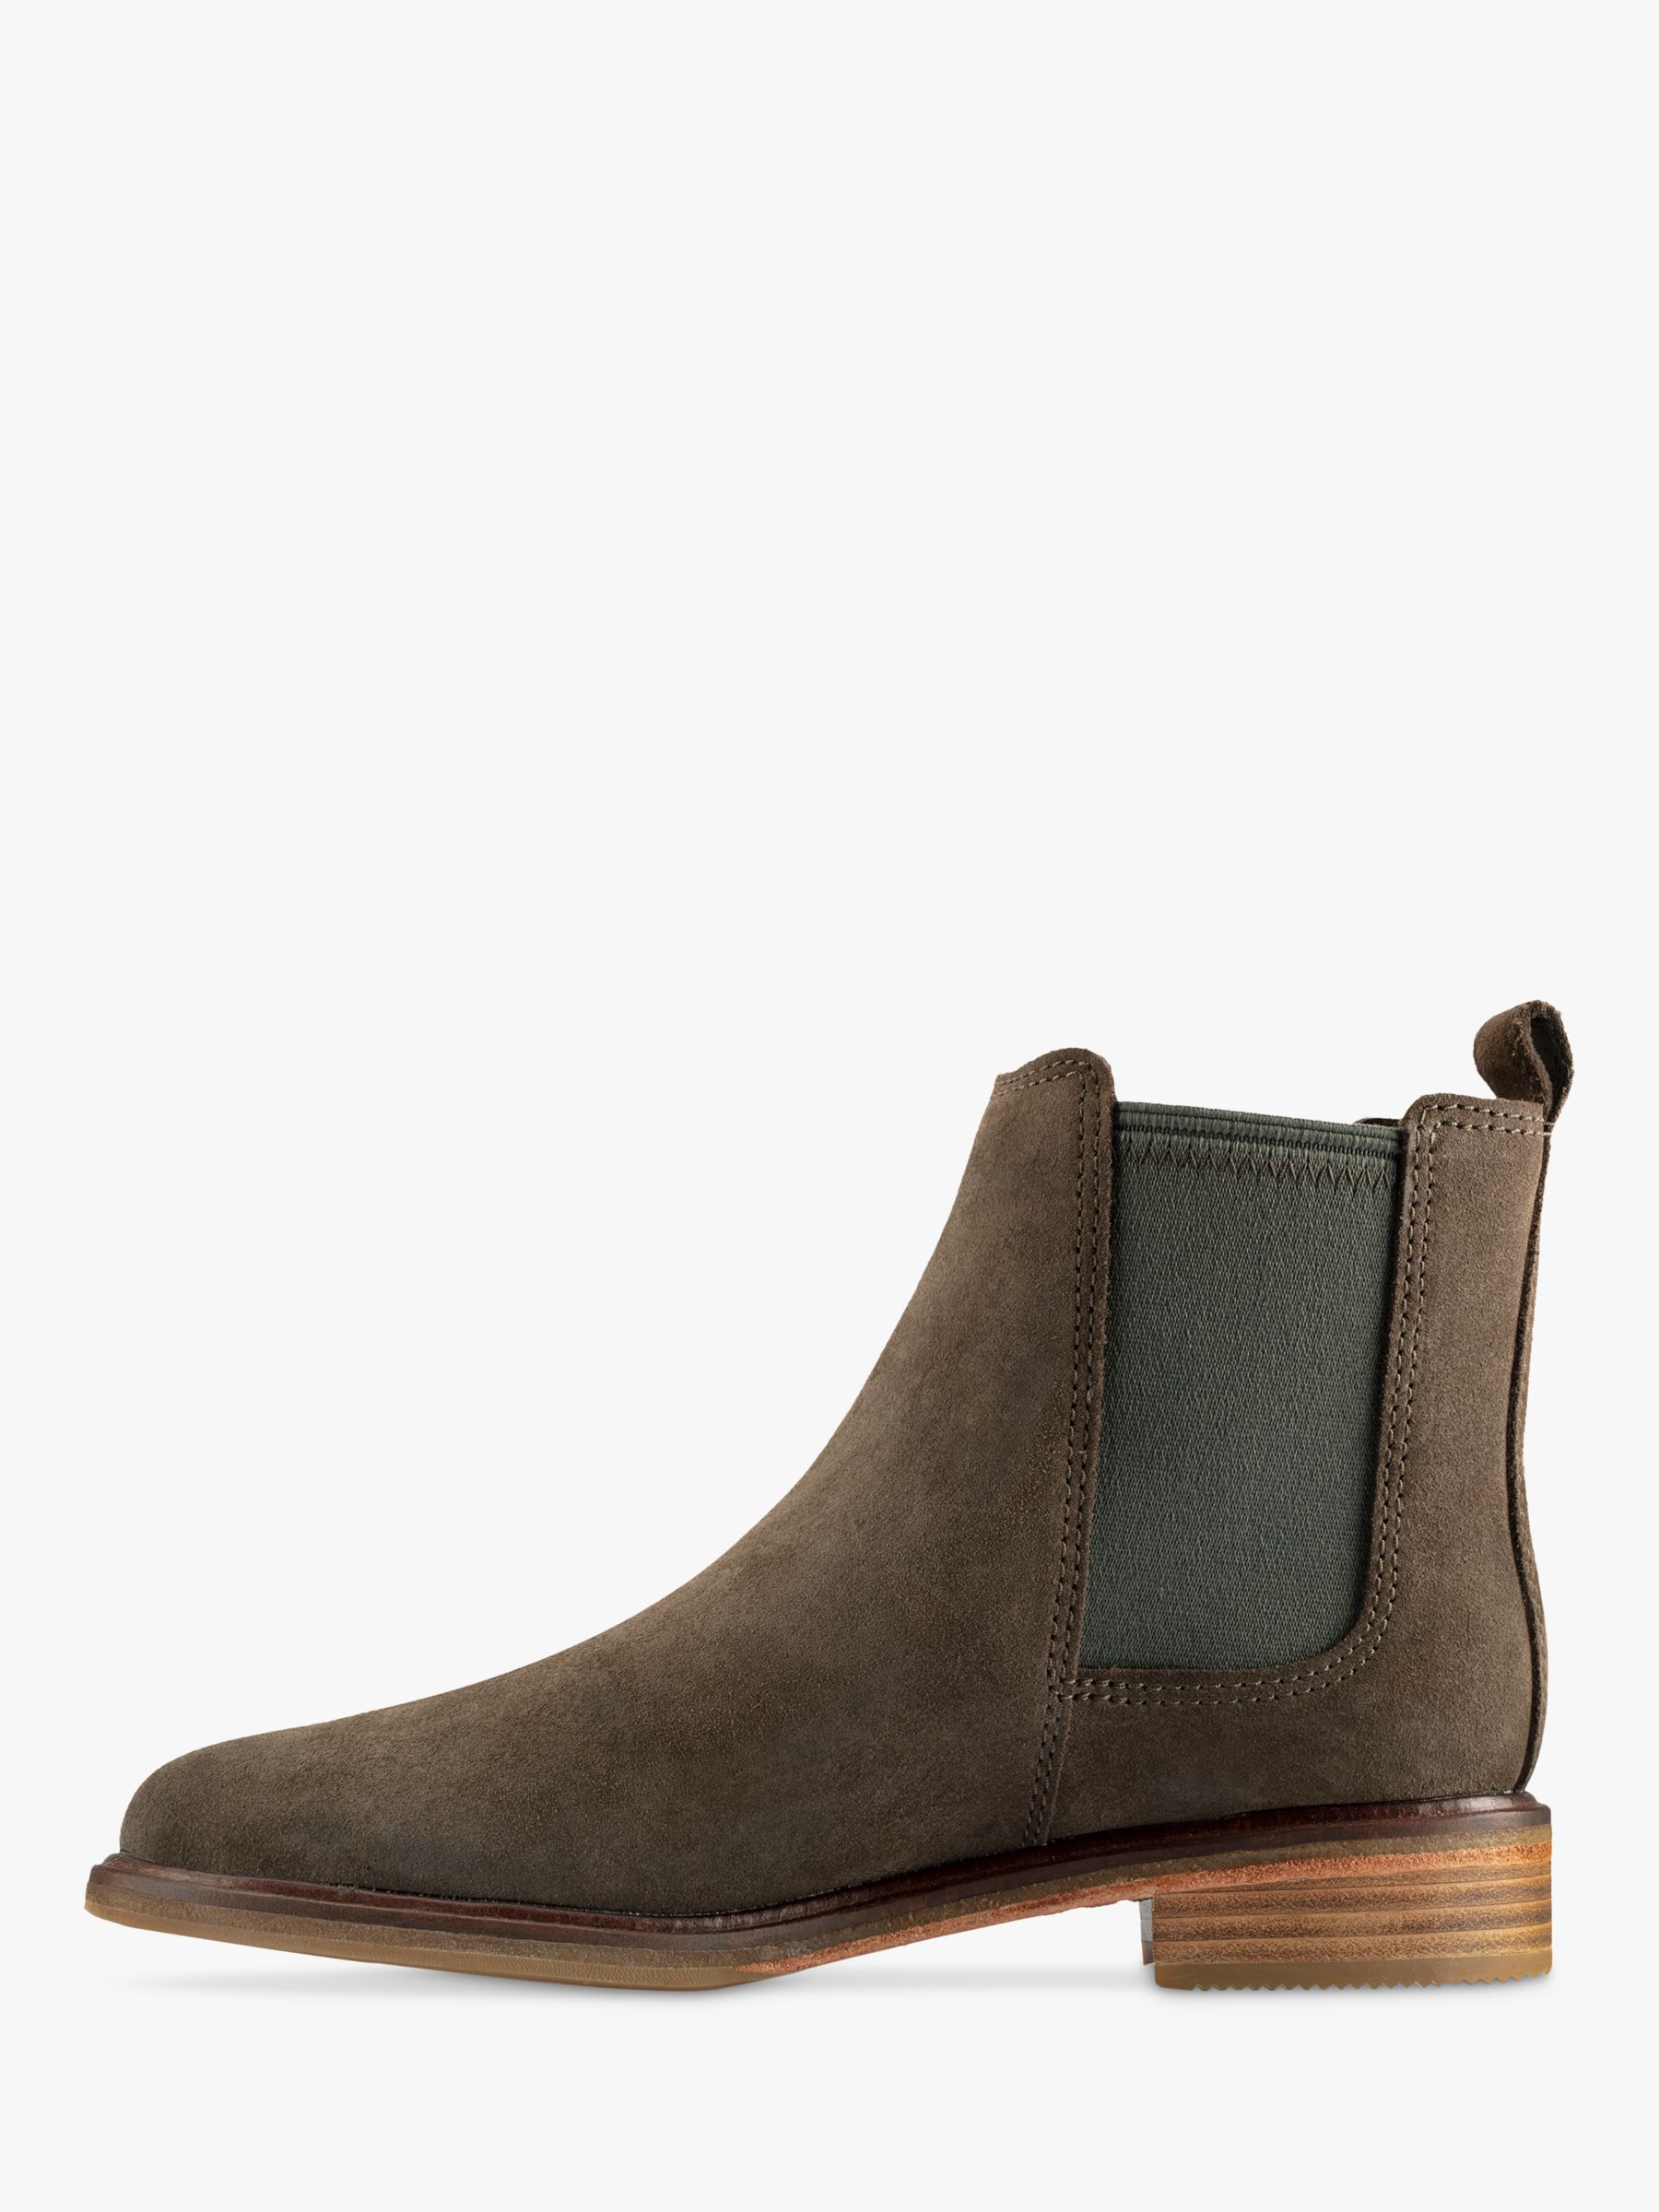 Clarks Clarkdale Arlo Suede Chelsea Boots, Dark Olive at John Lewis ...